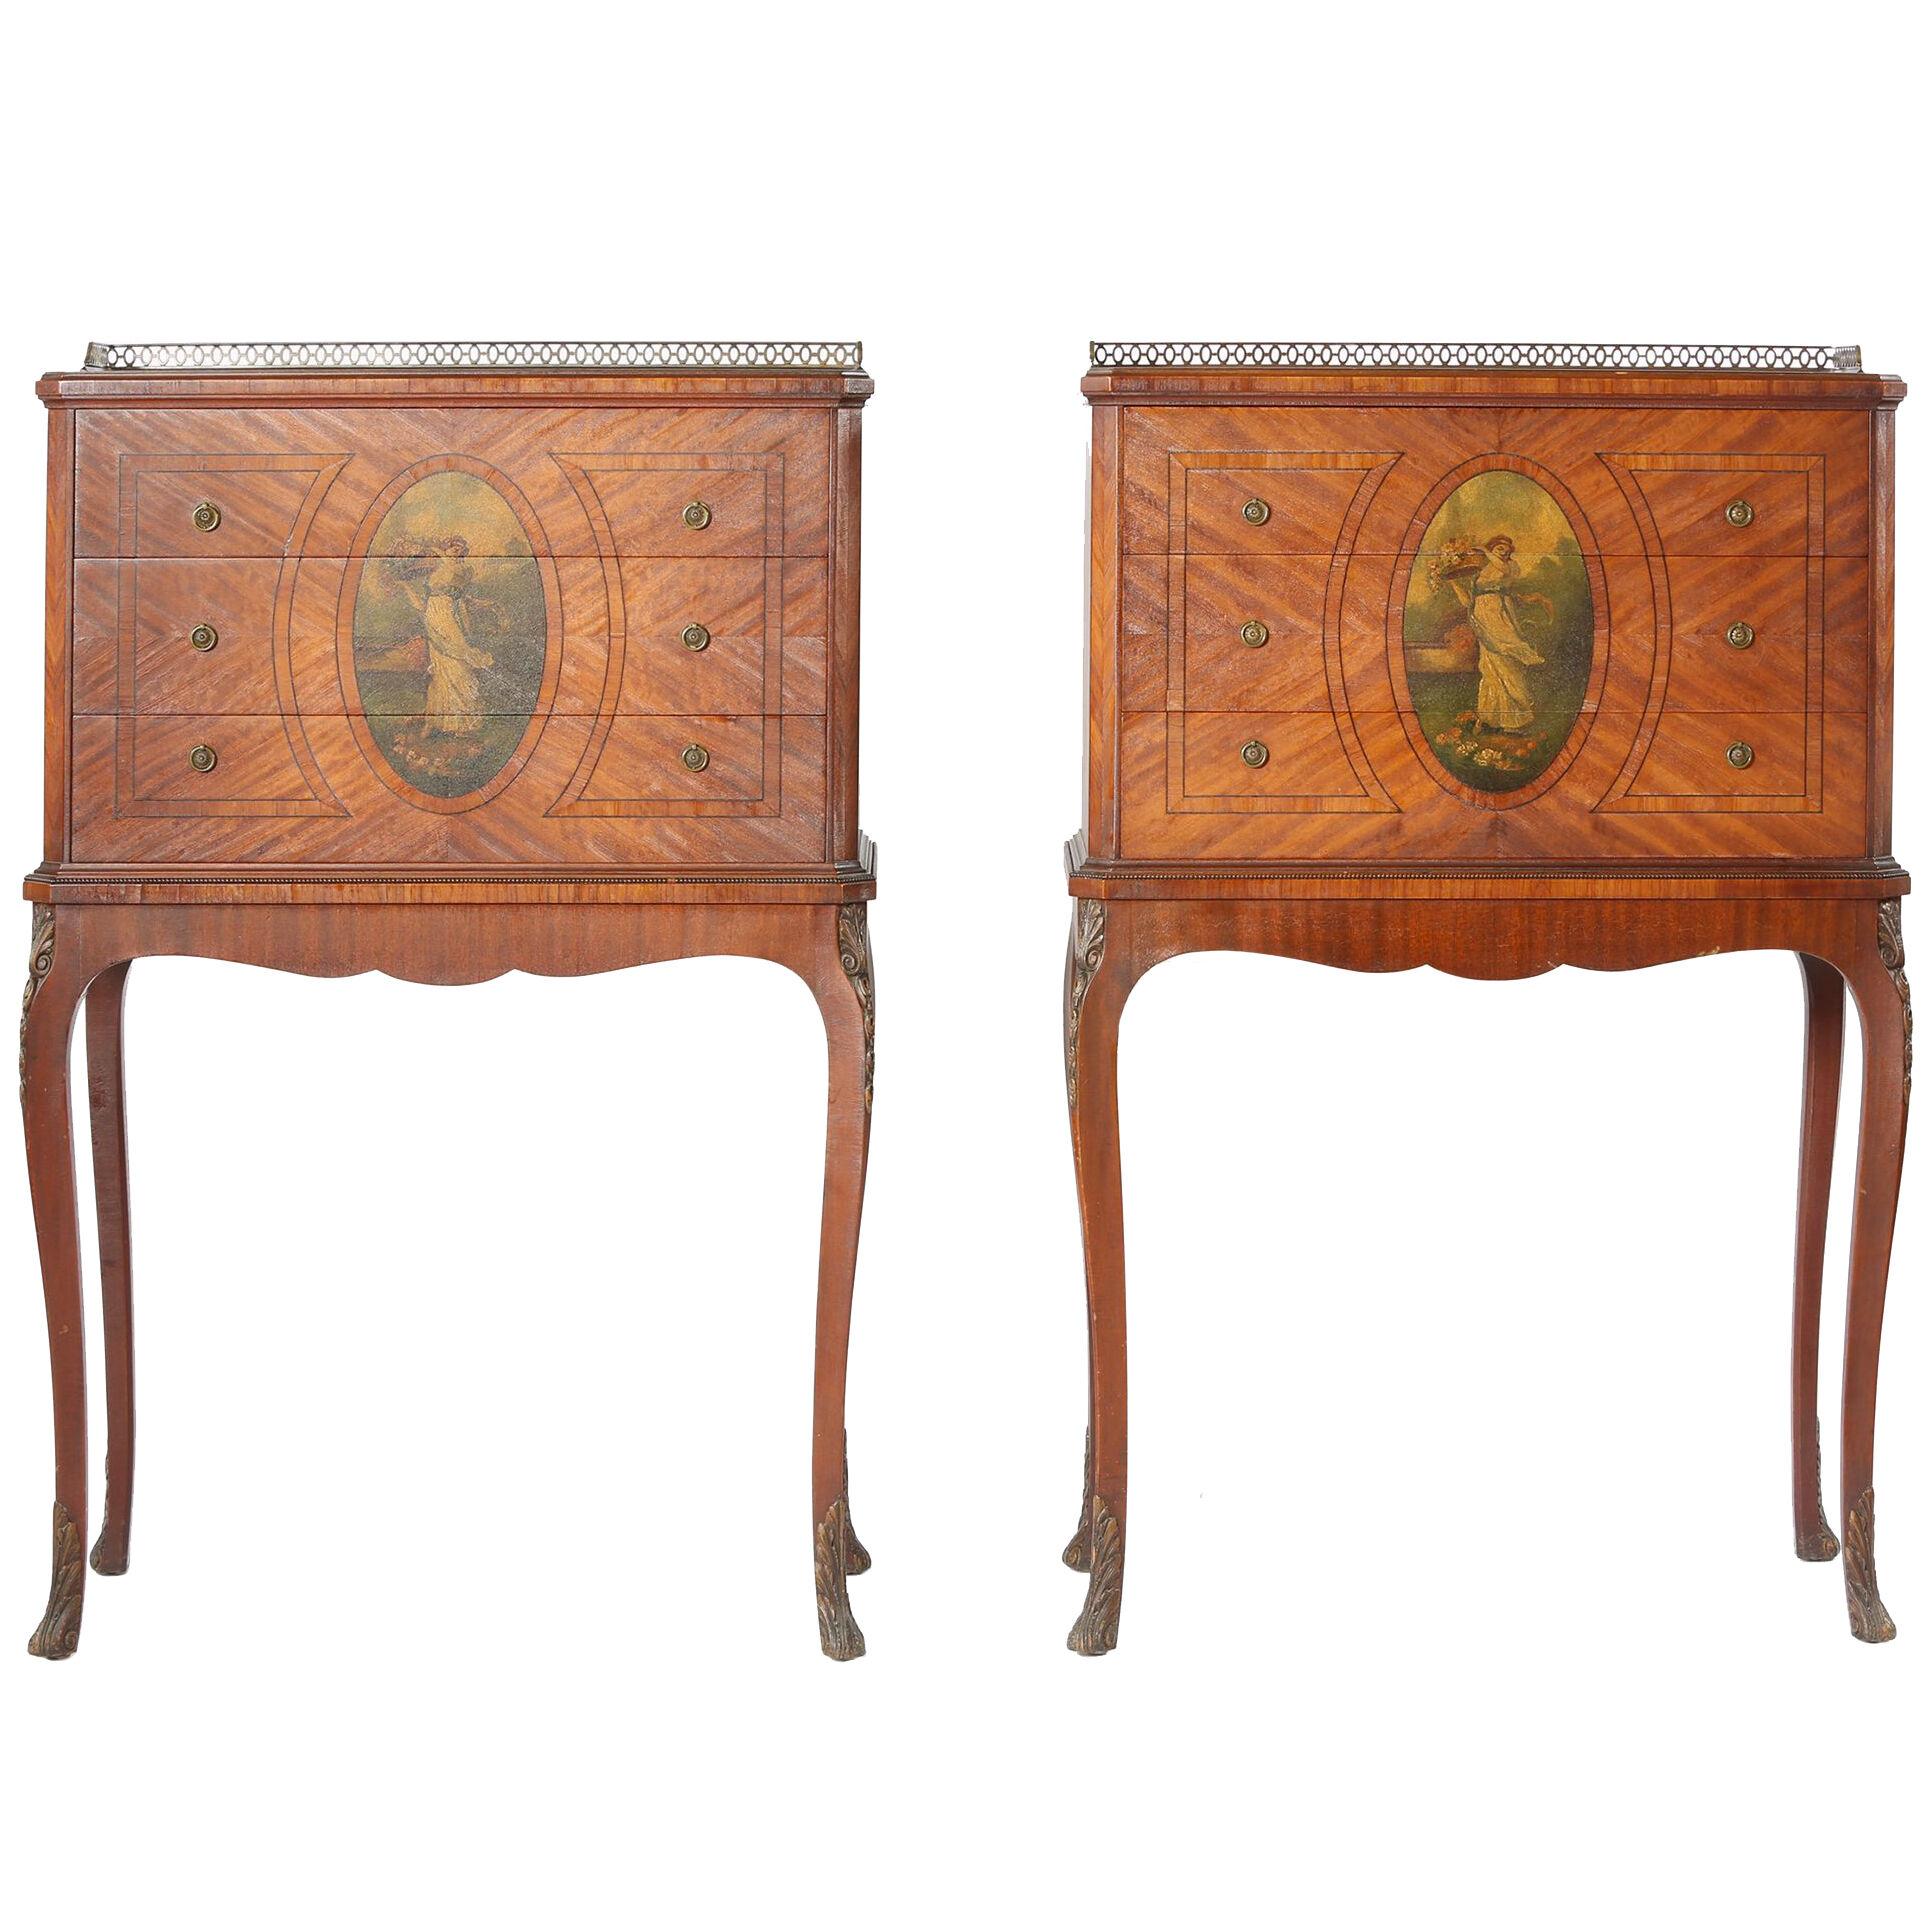 Pair of 19th Century Adams Style Satinwood Tables or Chests